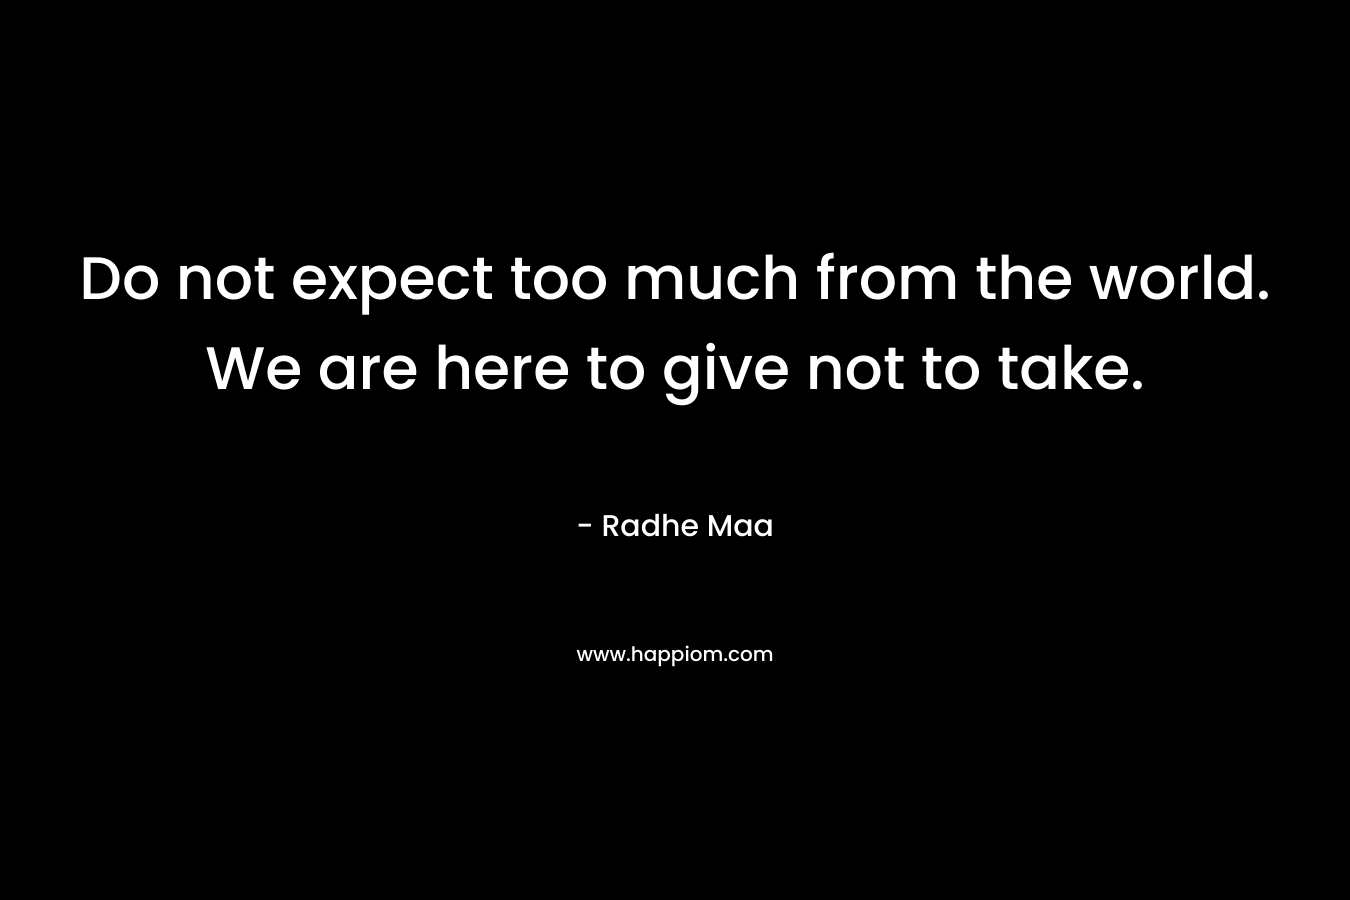 Do not expect too much from the world. We are here to give not to take.